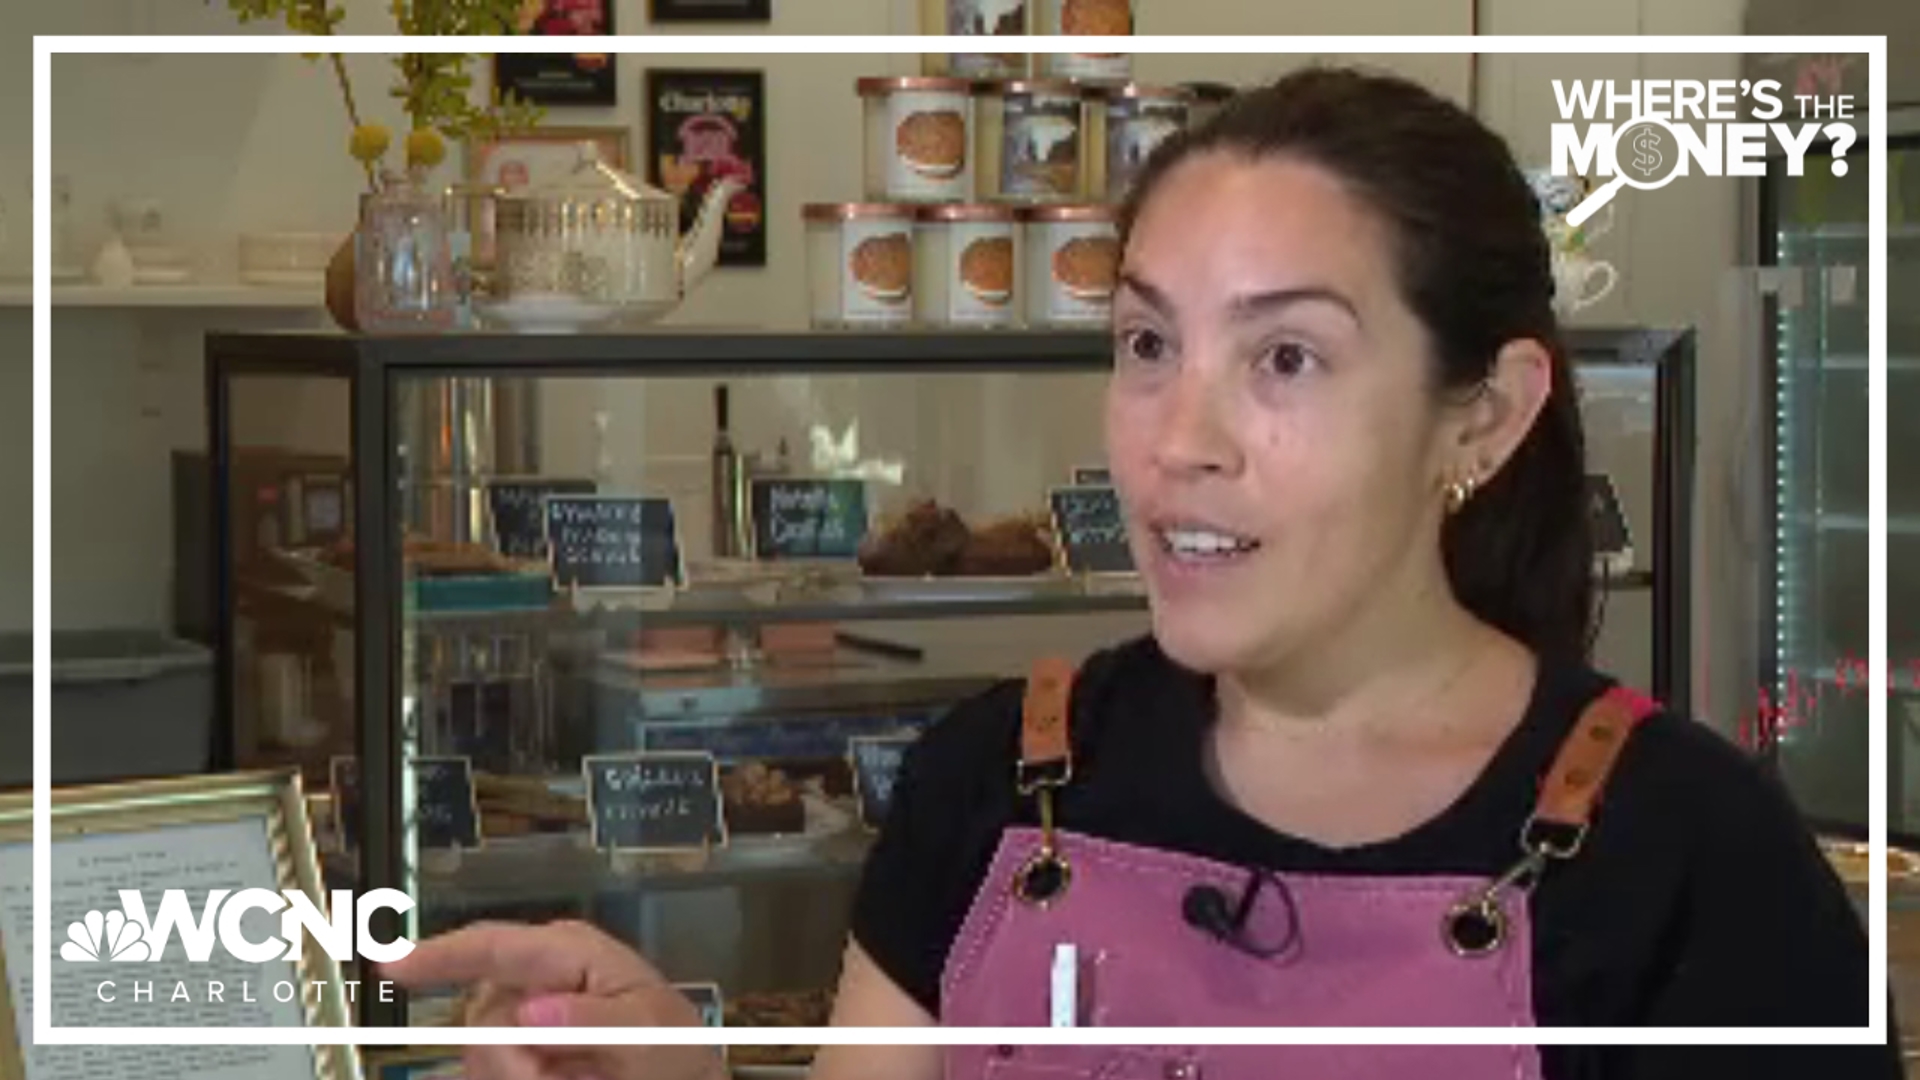 A popular Charlotte bakery is unexpectedly having to cook up some creativity to keep business going.